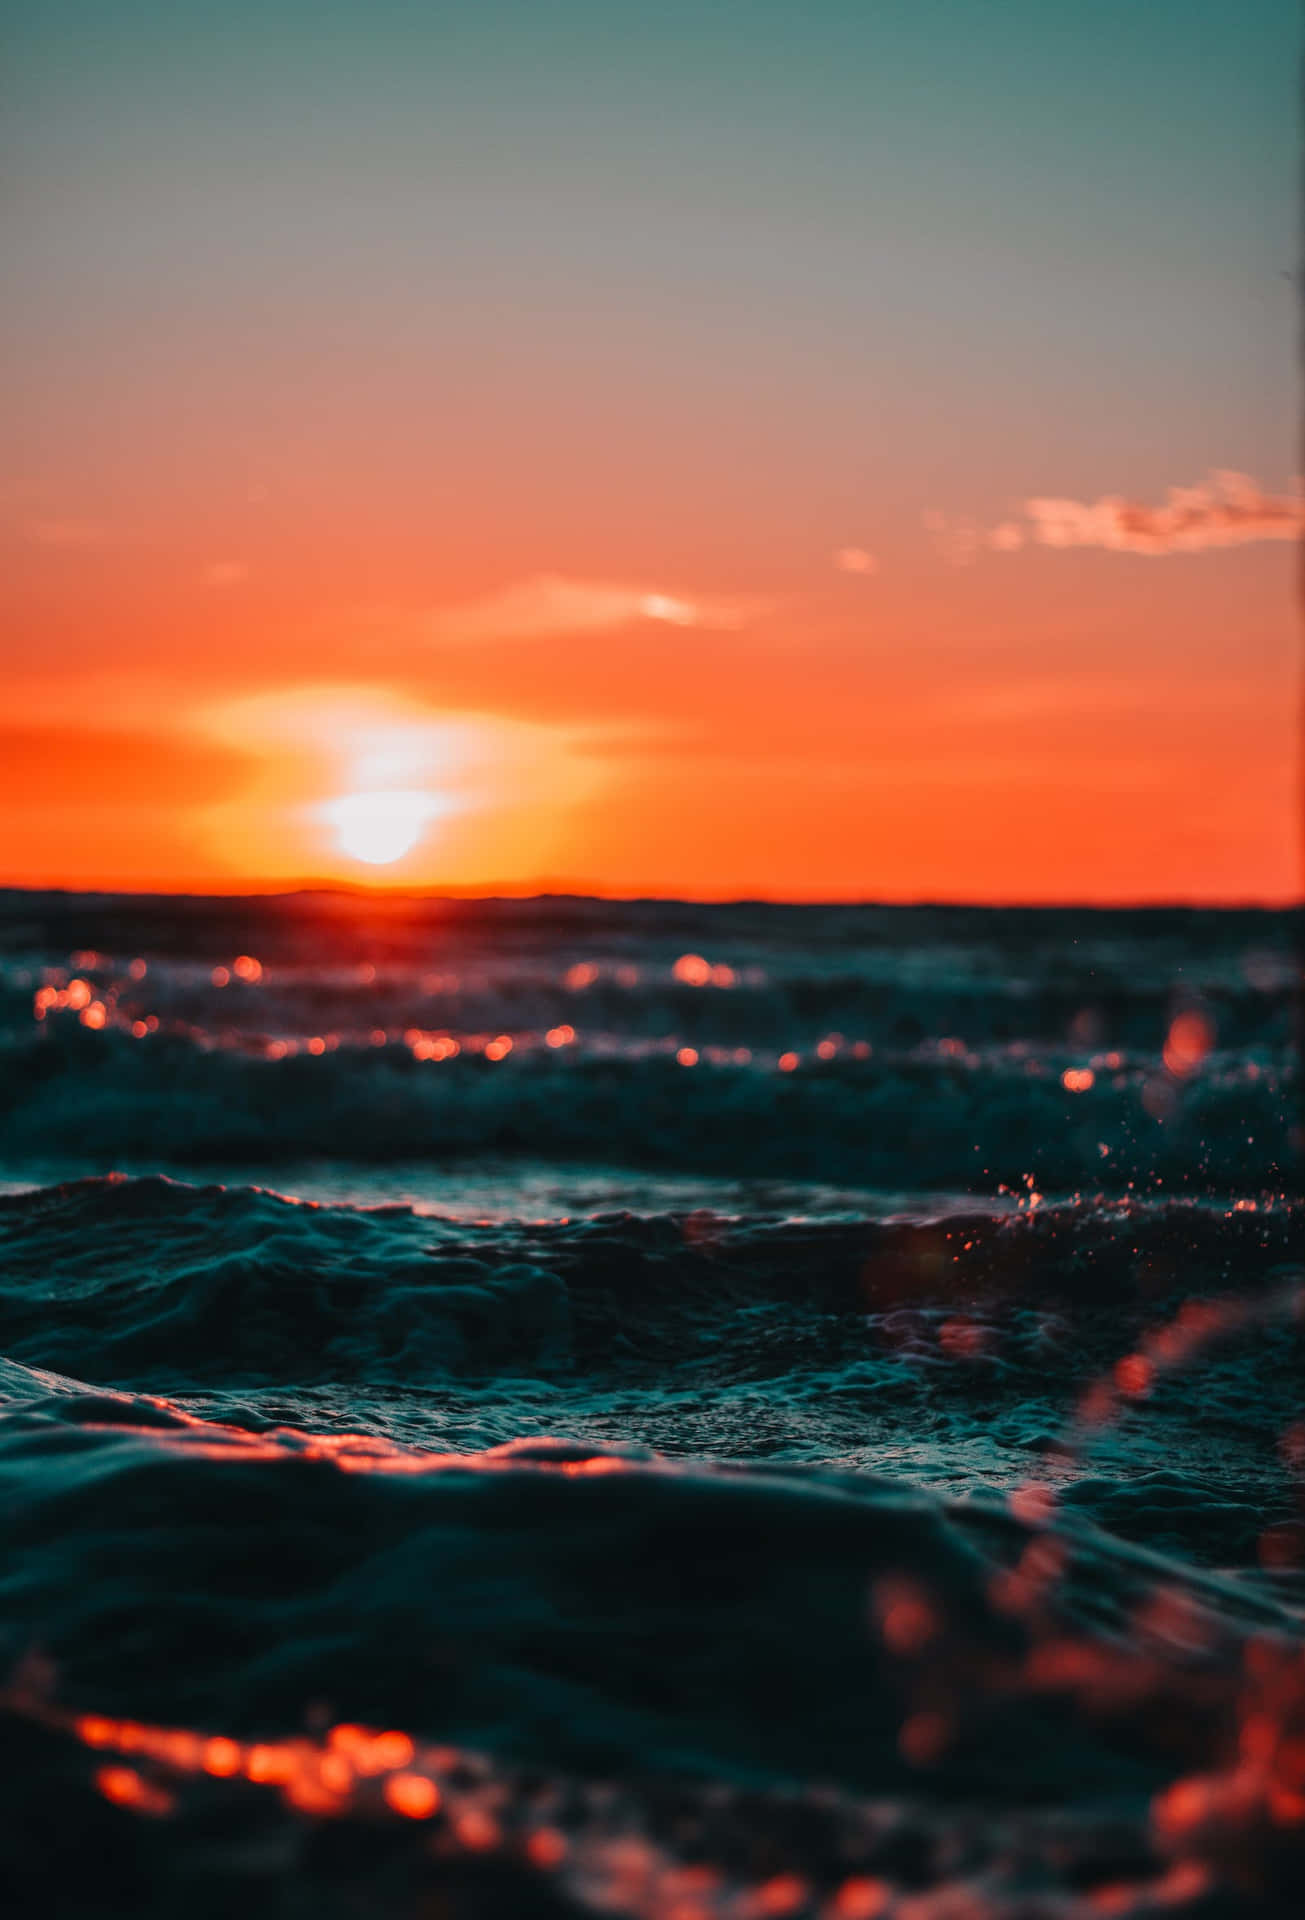 A Sunset Over The Ocean With Waves